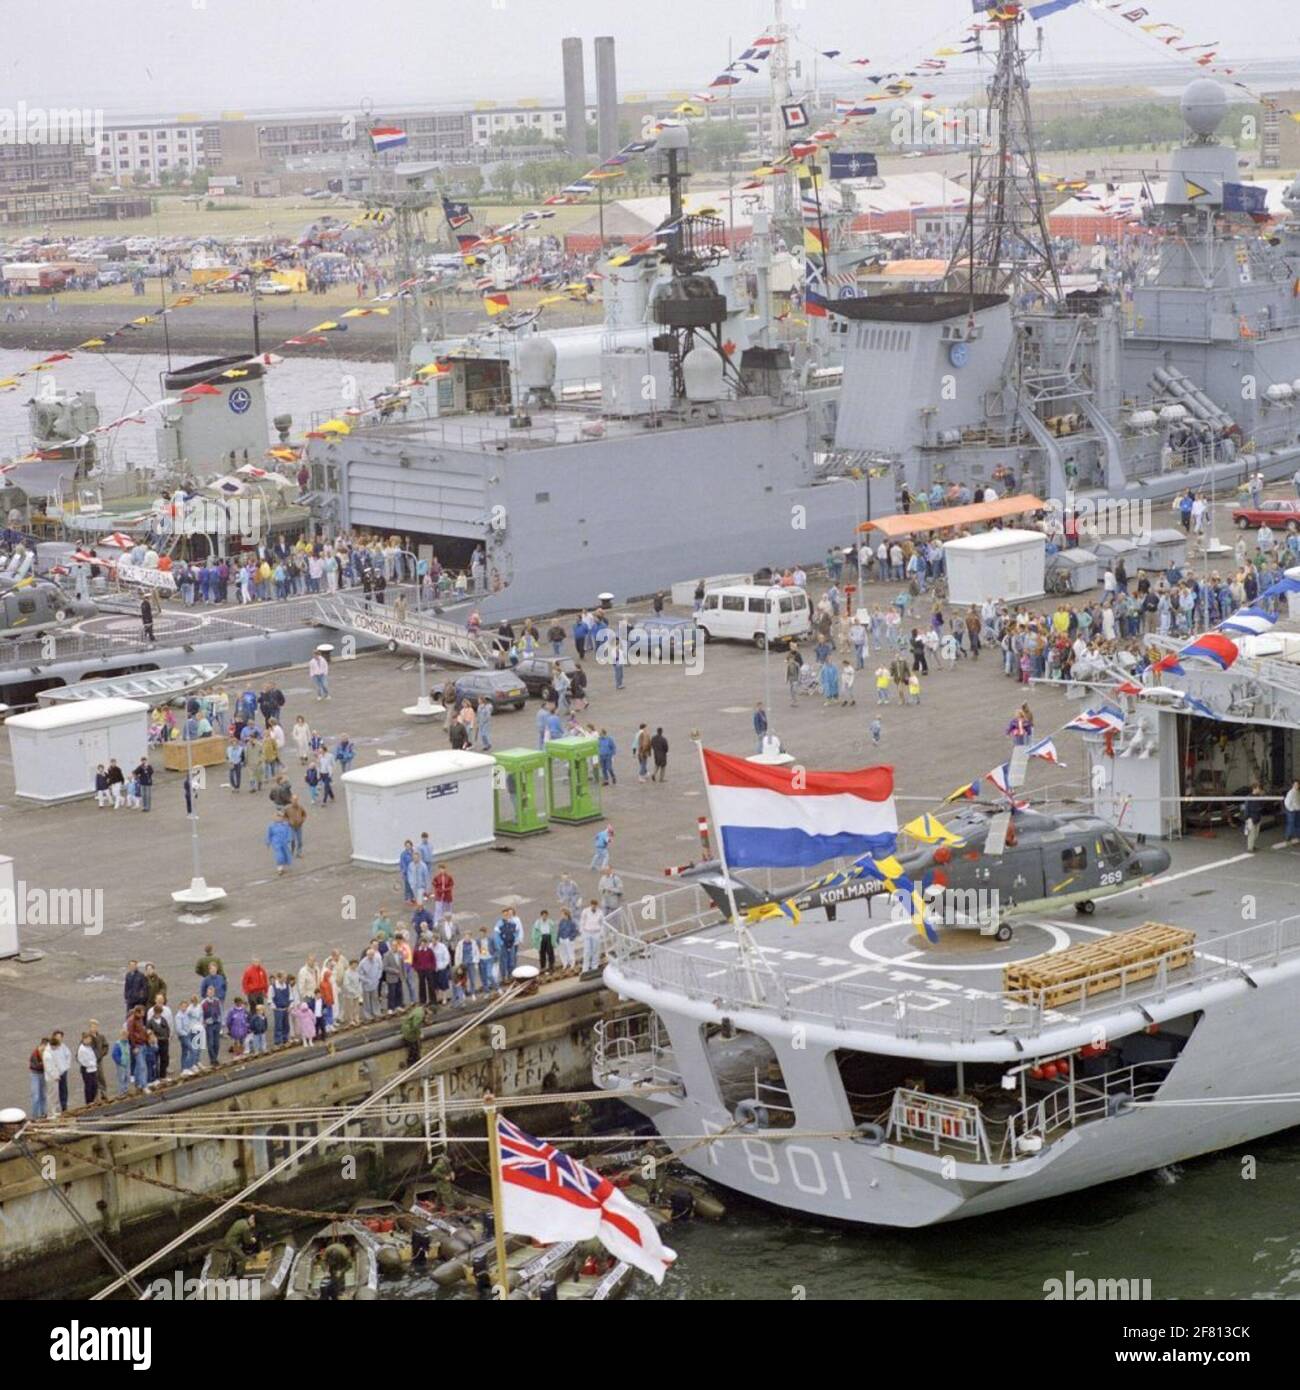 Printed during the fleet days 1989. At the front the stern (fence) of the frigate Hr.Ms. Tromp (F 801, 1975-1999) and on the other side of the scaffolding the German frigate FGS Rheinland-Pfalz (F 209, 1983). The chimney of the Portuguese Frigate NRP was also shown commander Roberto Ivens (F 482, 1968). Stock Photo